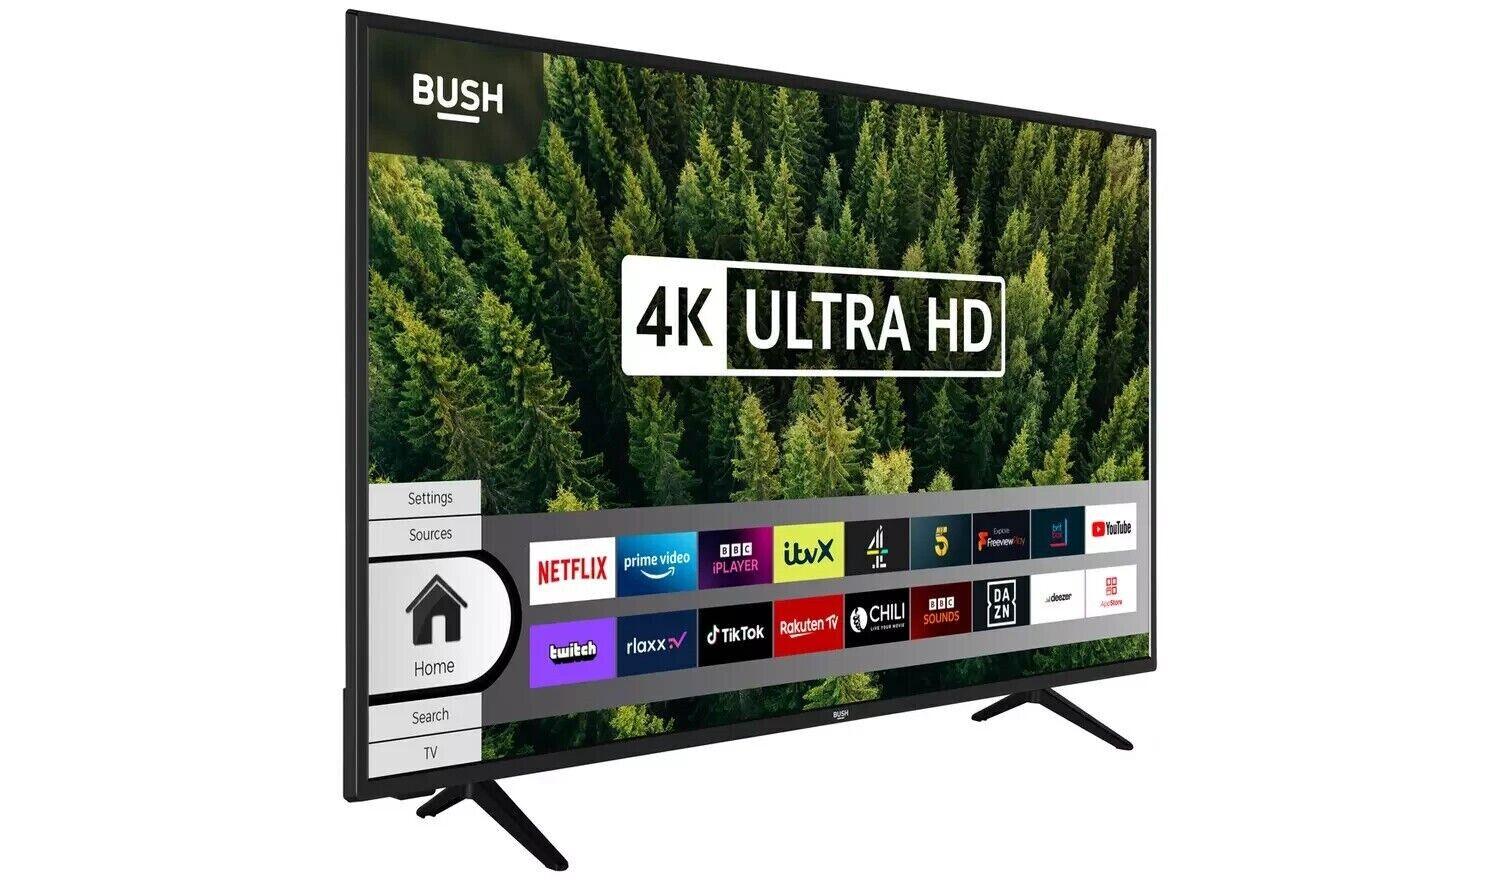 Bush 43 Inch Smart 4K UHD HDR LED Freeview TV COLLECTION ONLY NO STAND - Smart Clear Vision